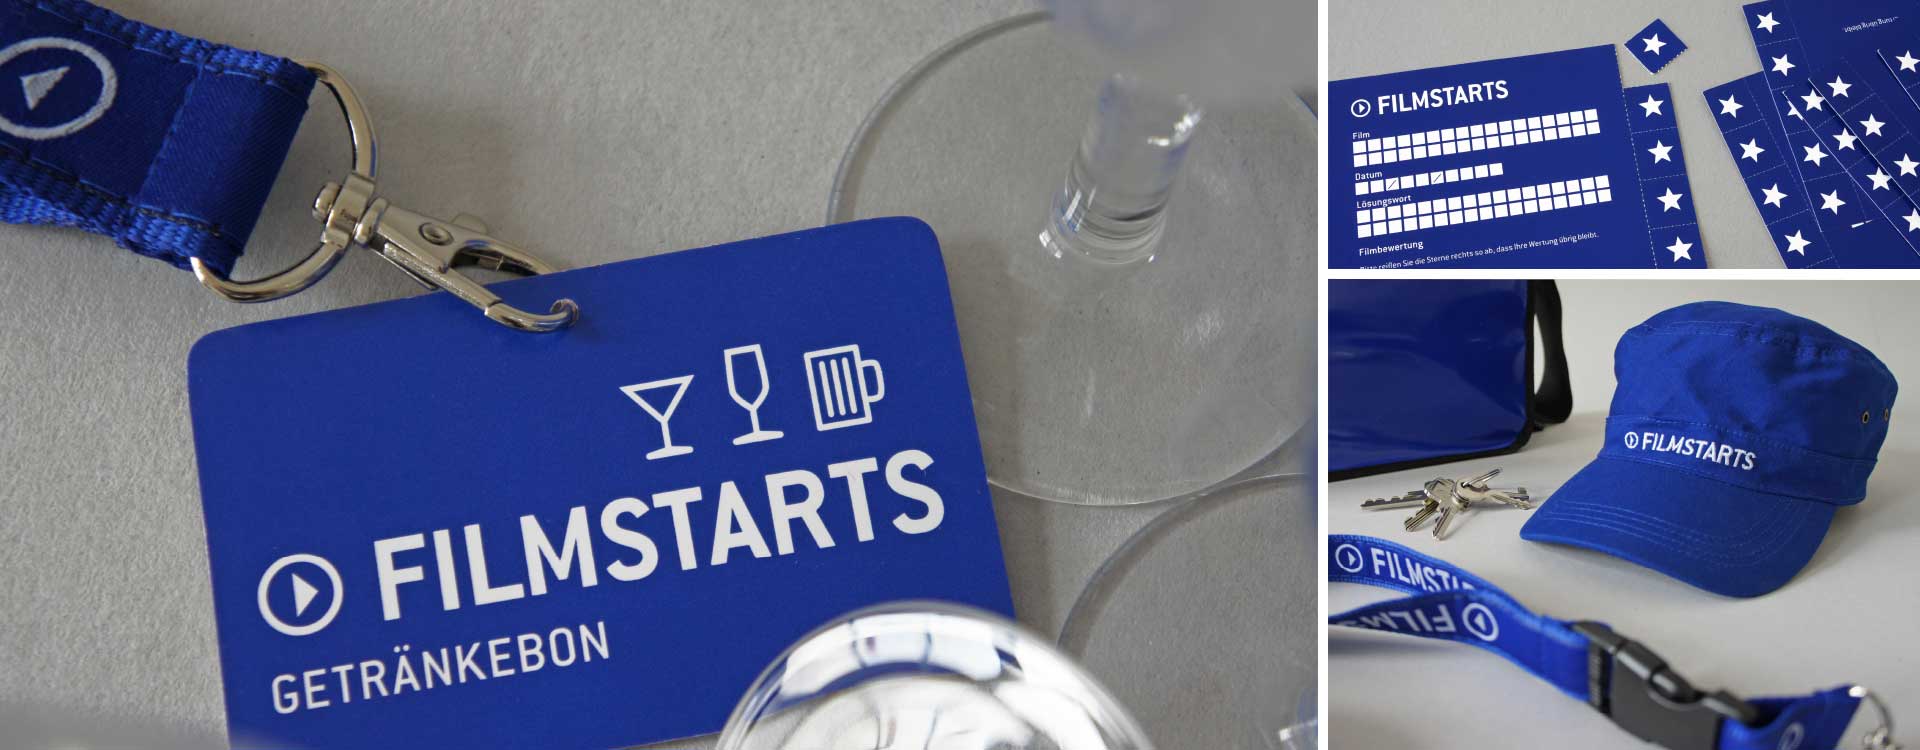 Drink vouchers, film rating cards, and cap with Filmstarts logo